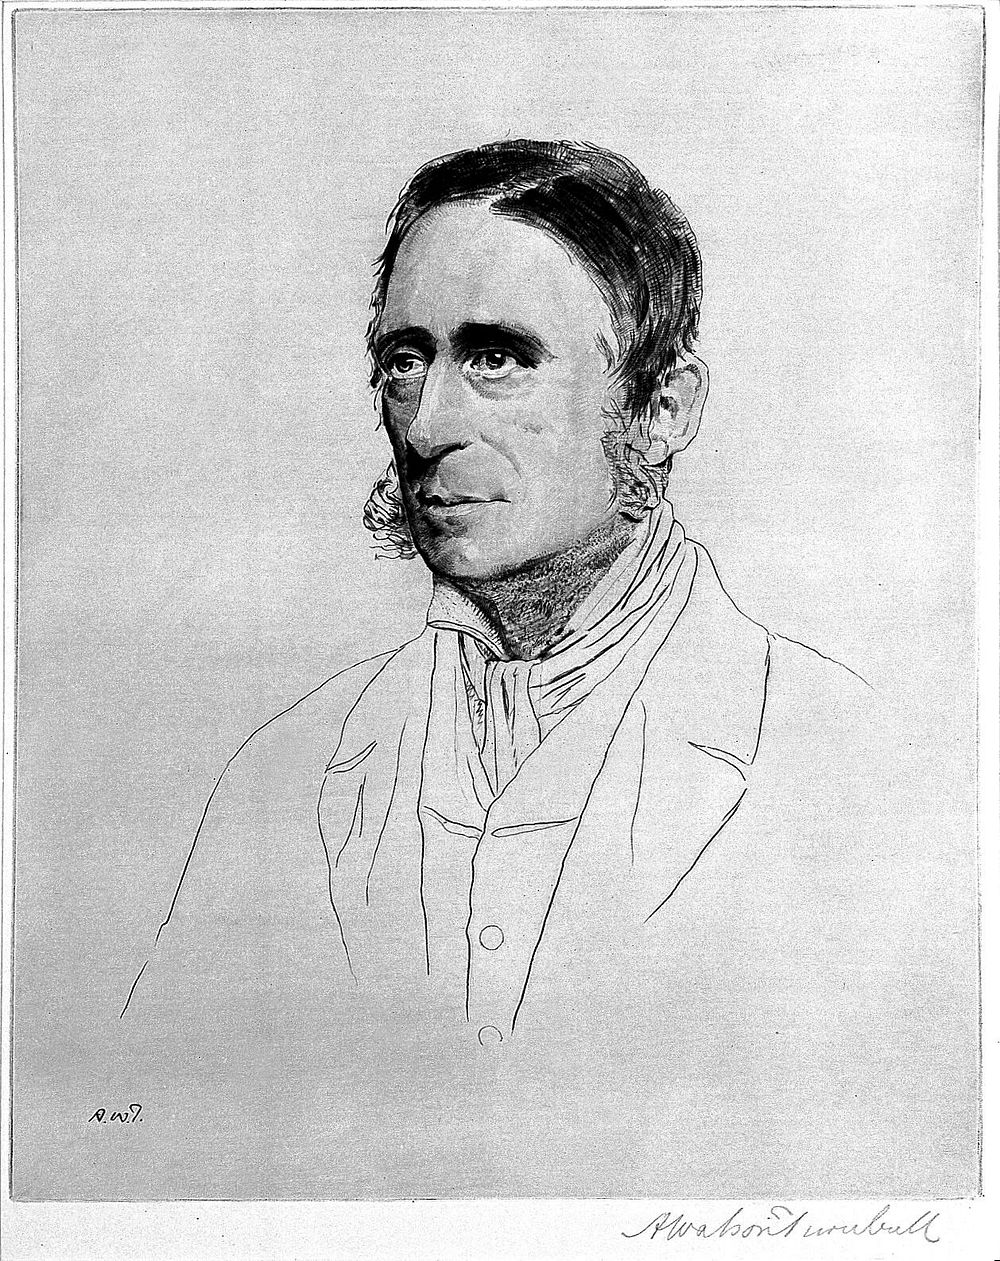 Sir James Paget. Etching by A. W. Turnbull.